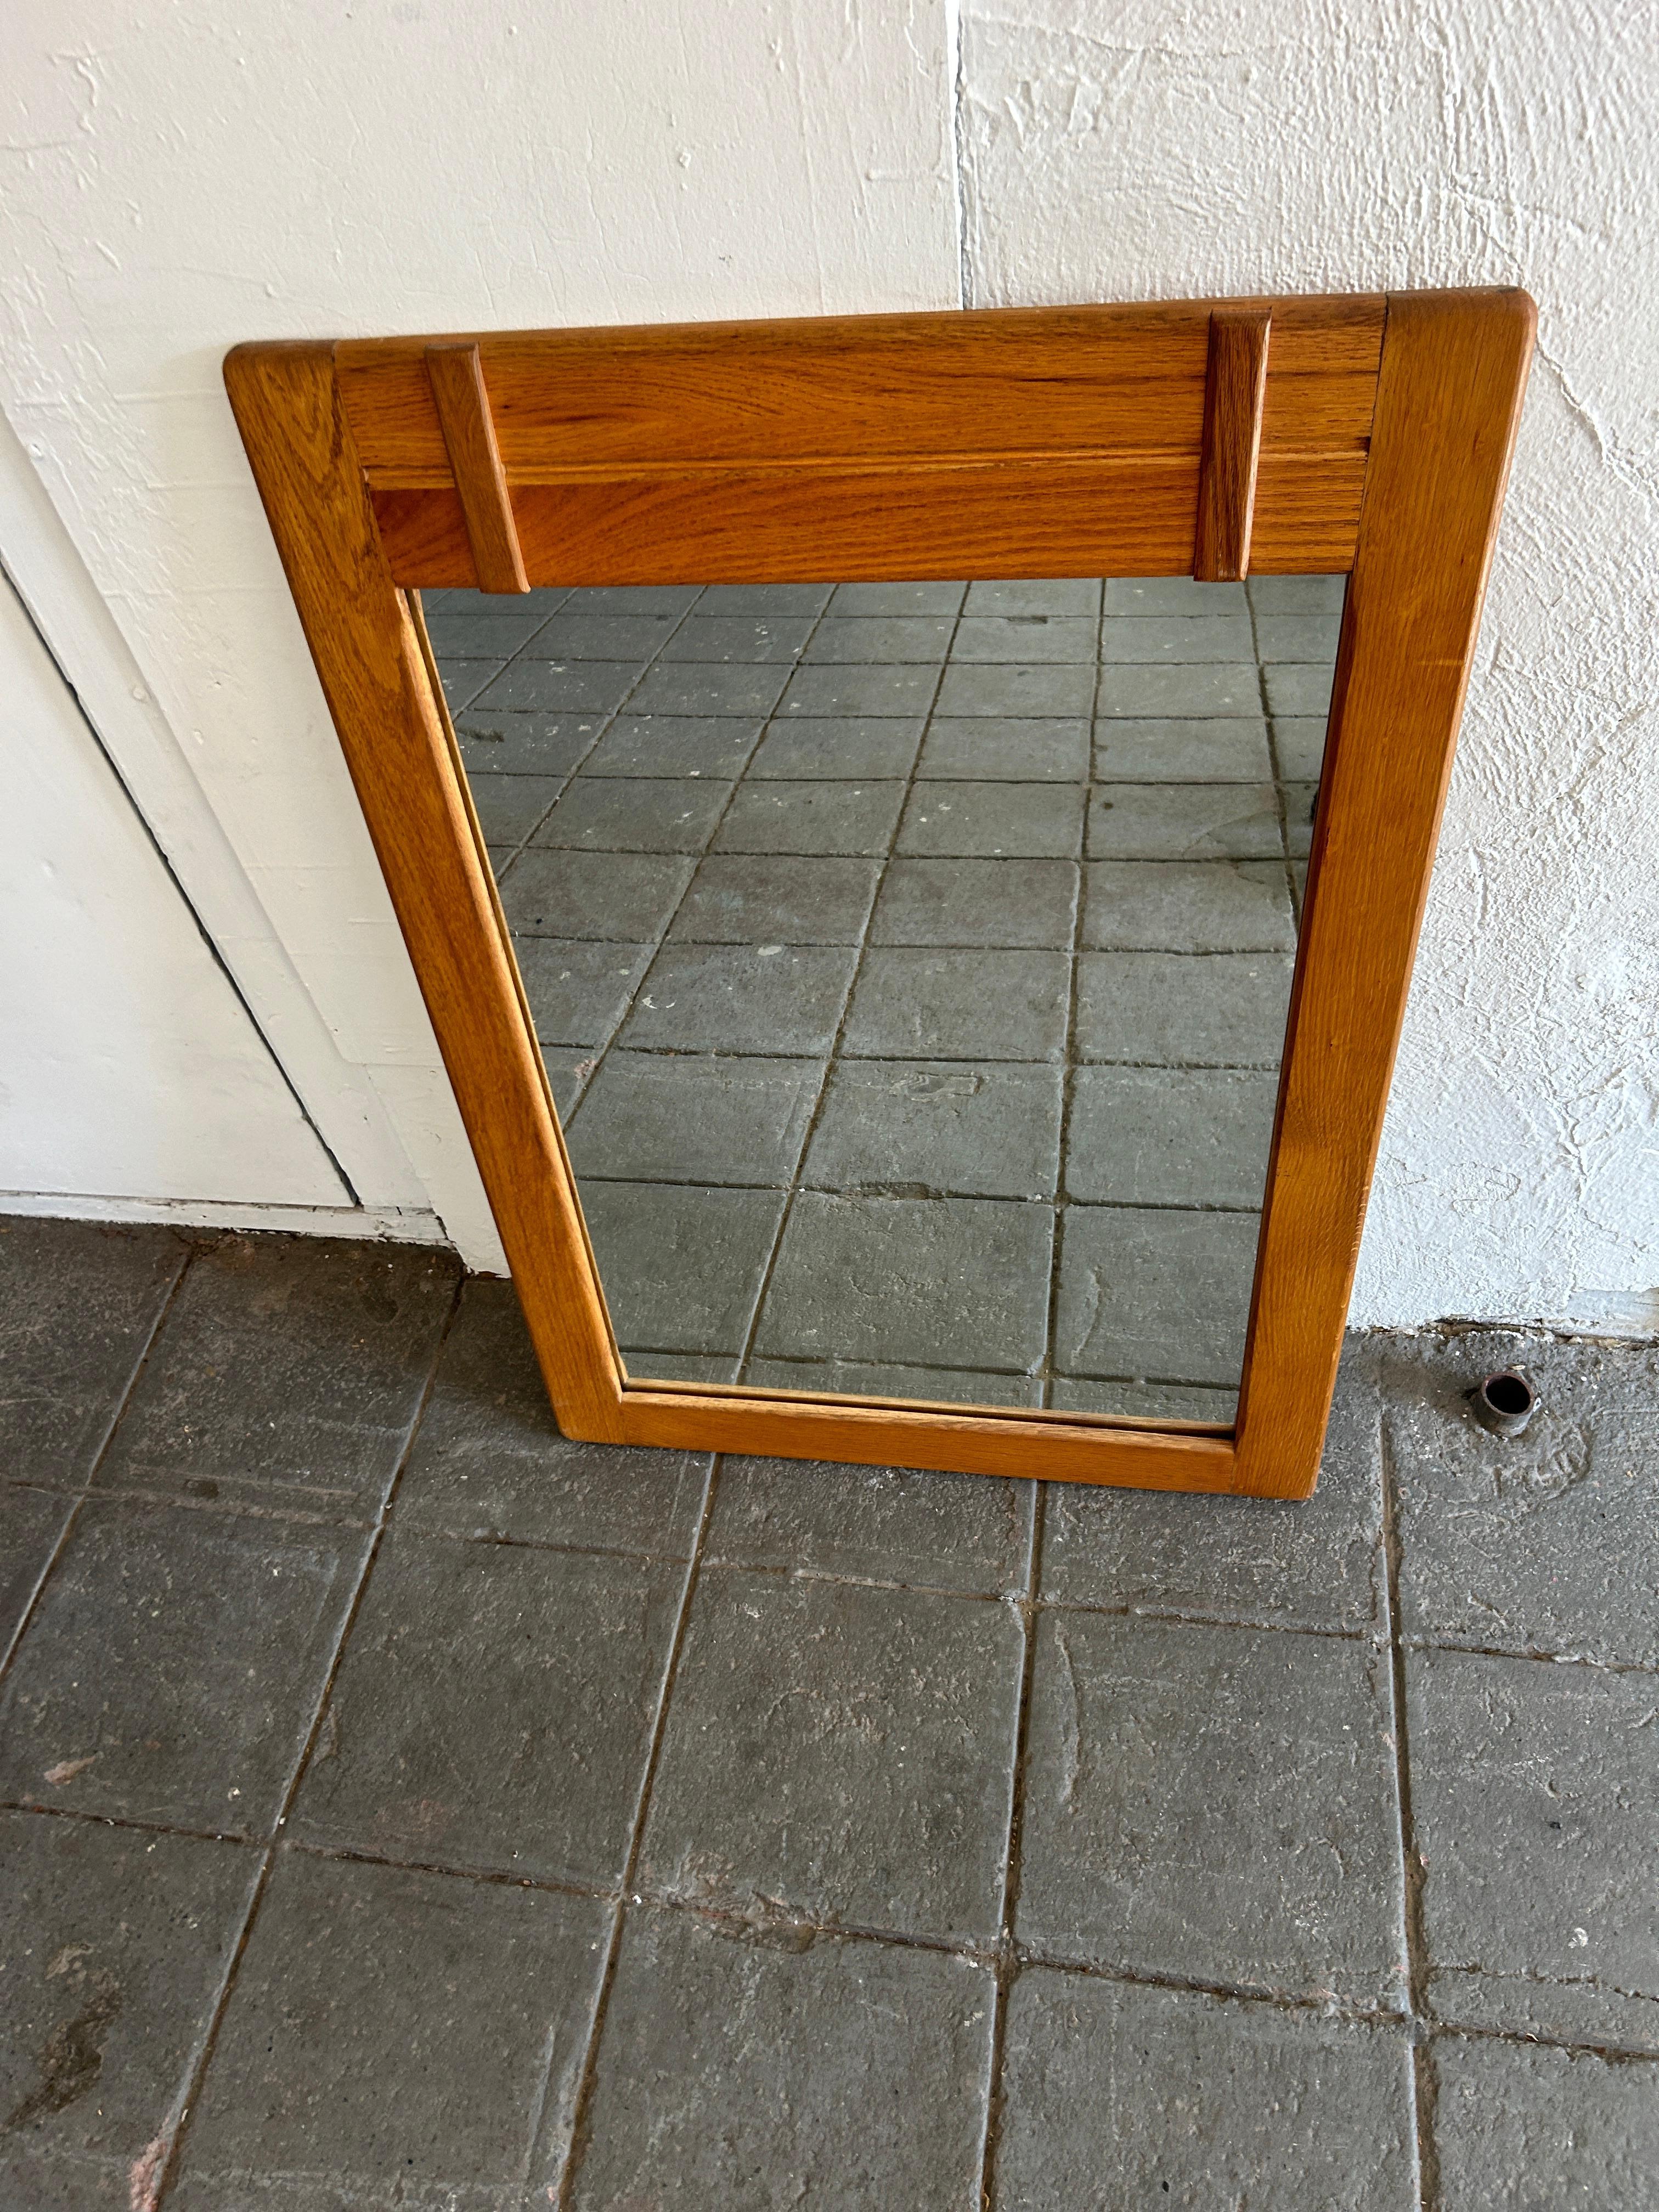 Mid century Scandinavian modern vertical wall mirror. Solid pine wood frame with wood details and thick mirror. Wired to hang vertical. Located in Brooklyn NYC.

29” w x 42” h x 1” thick